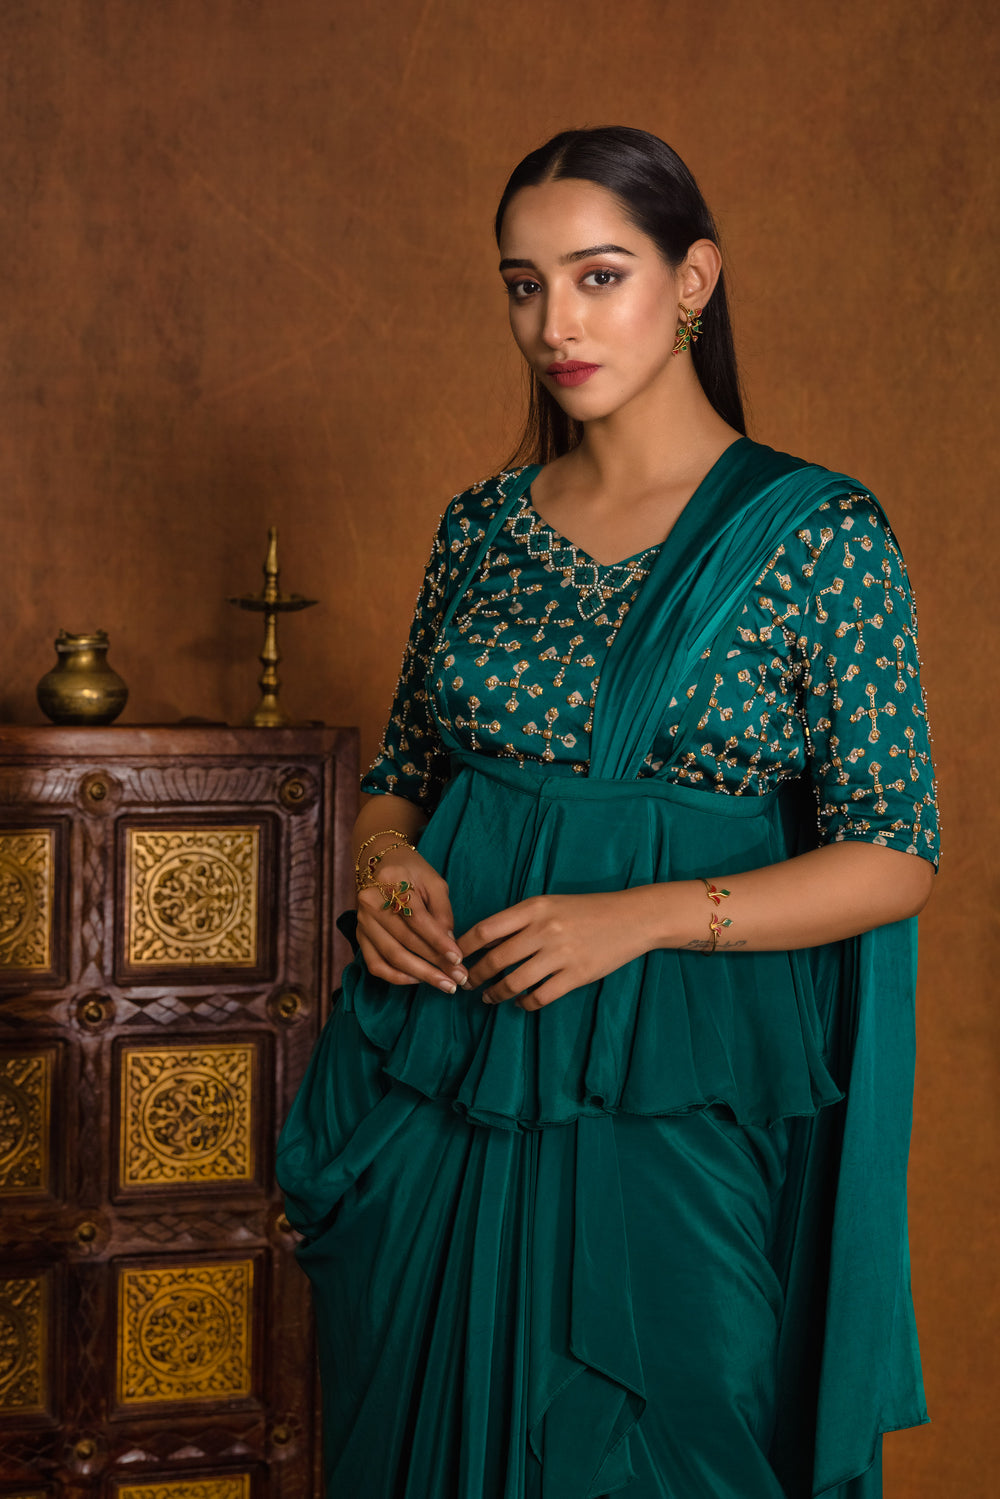 Bandhani embroidered blouse with draped wrap saree styled with suspender peplum